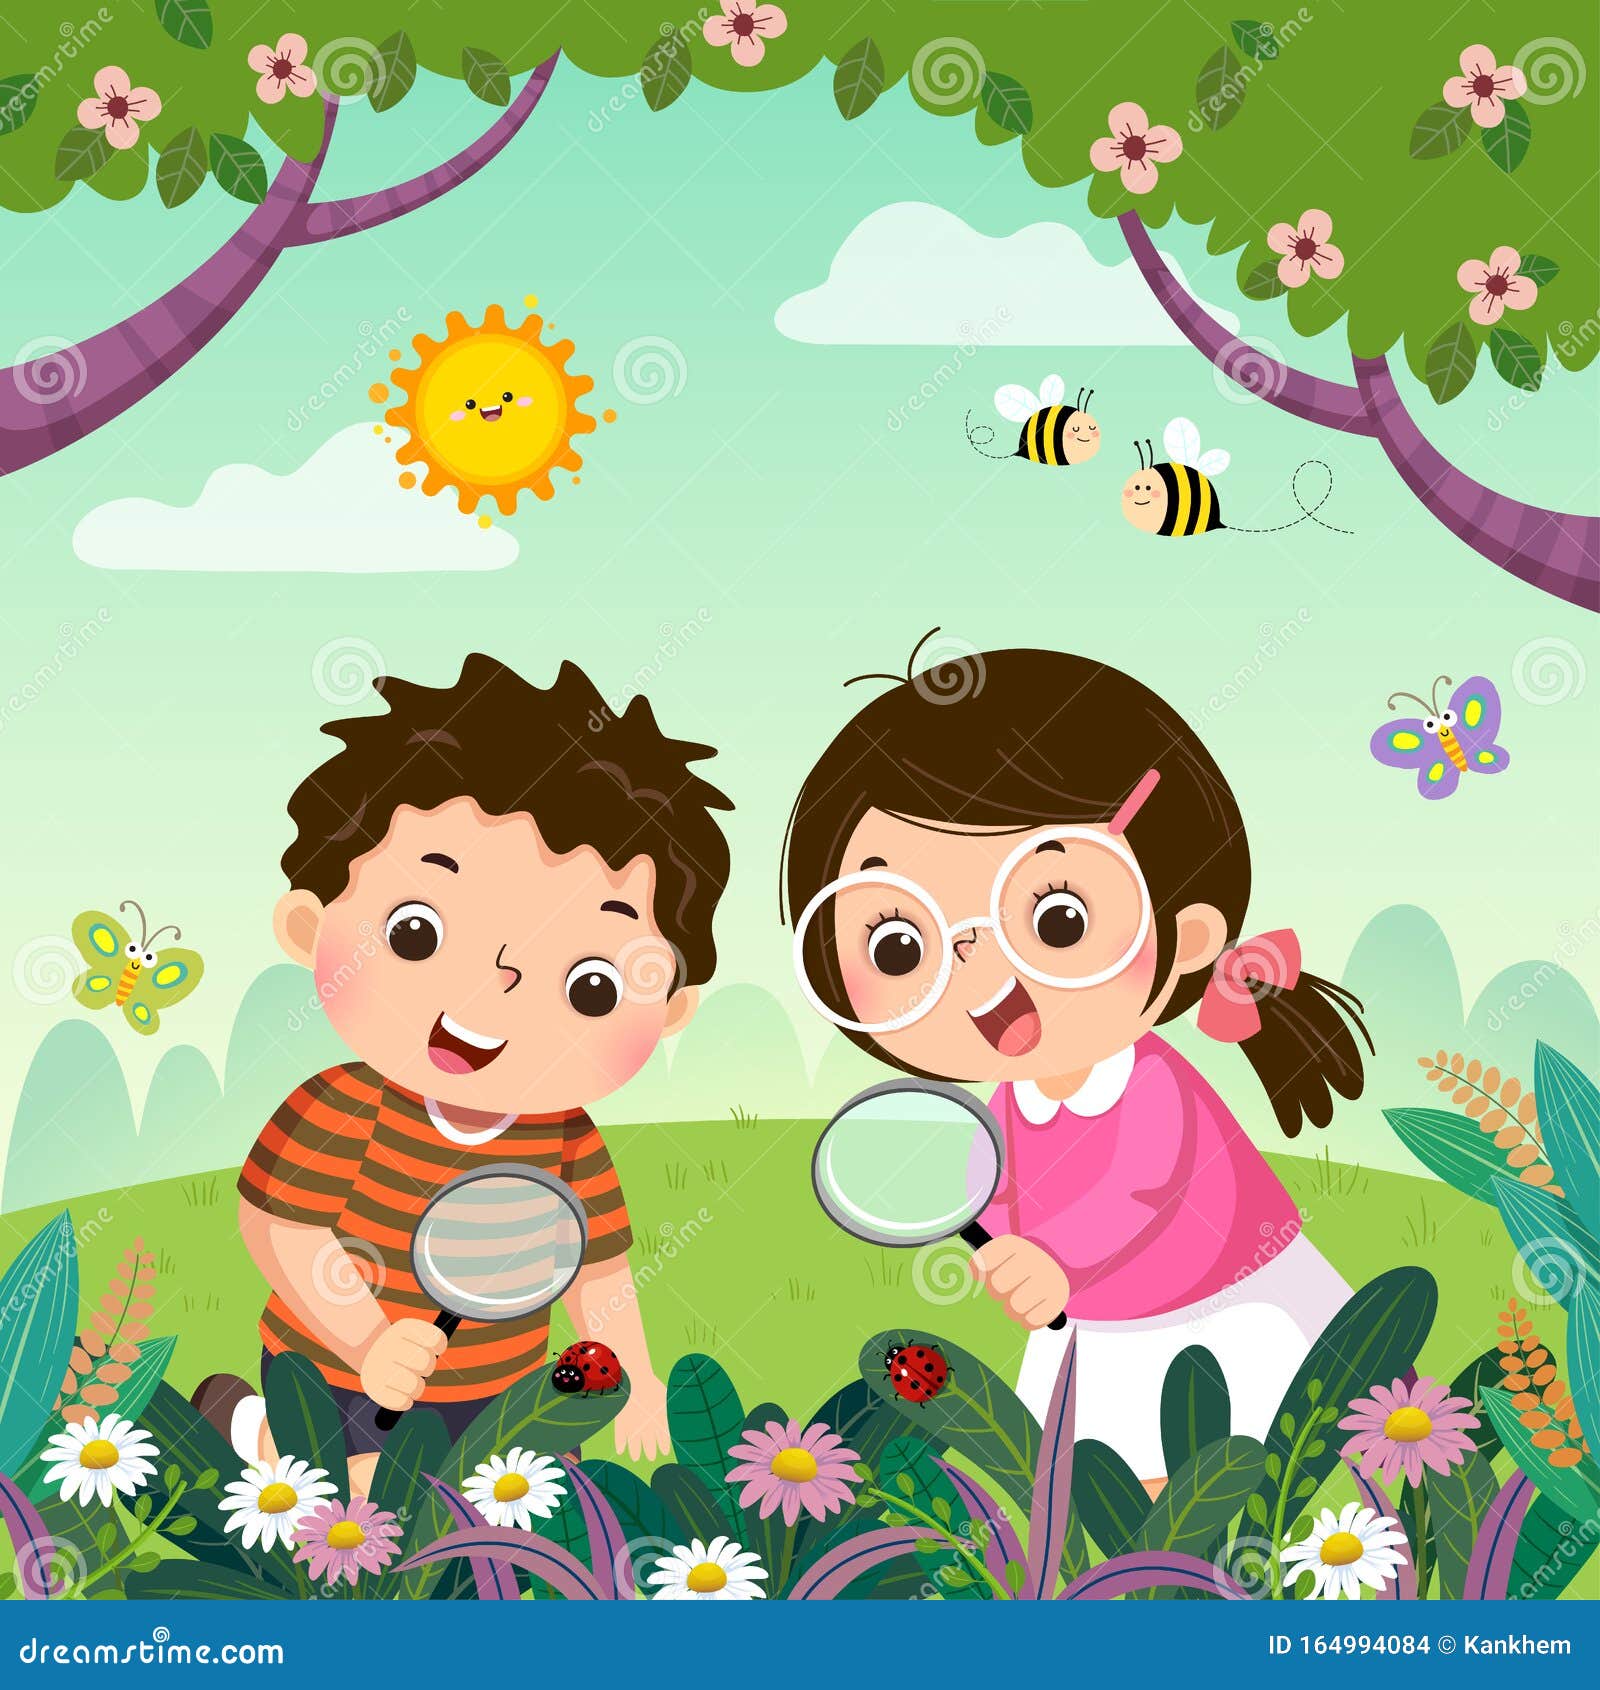 two kids looking through magnifying glass at ladybugs on plants. children observing nature